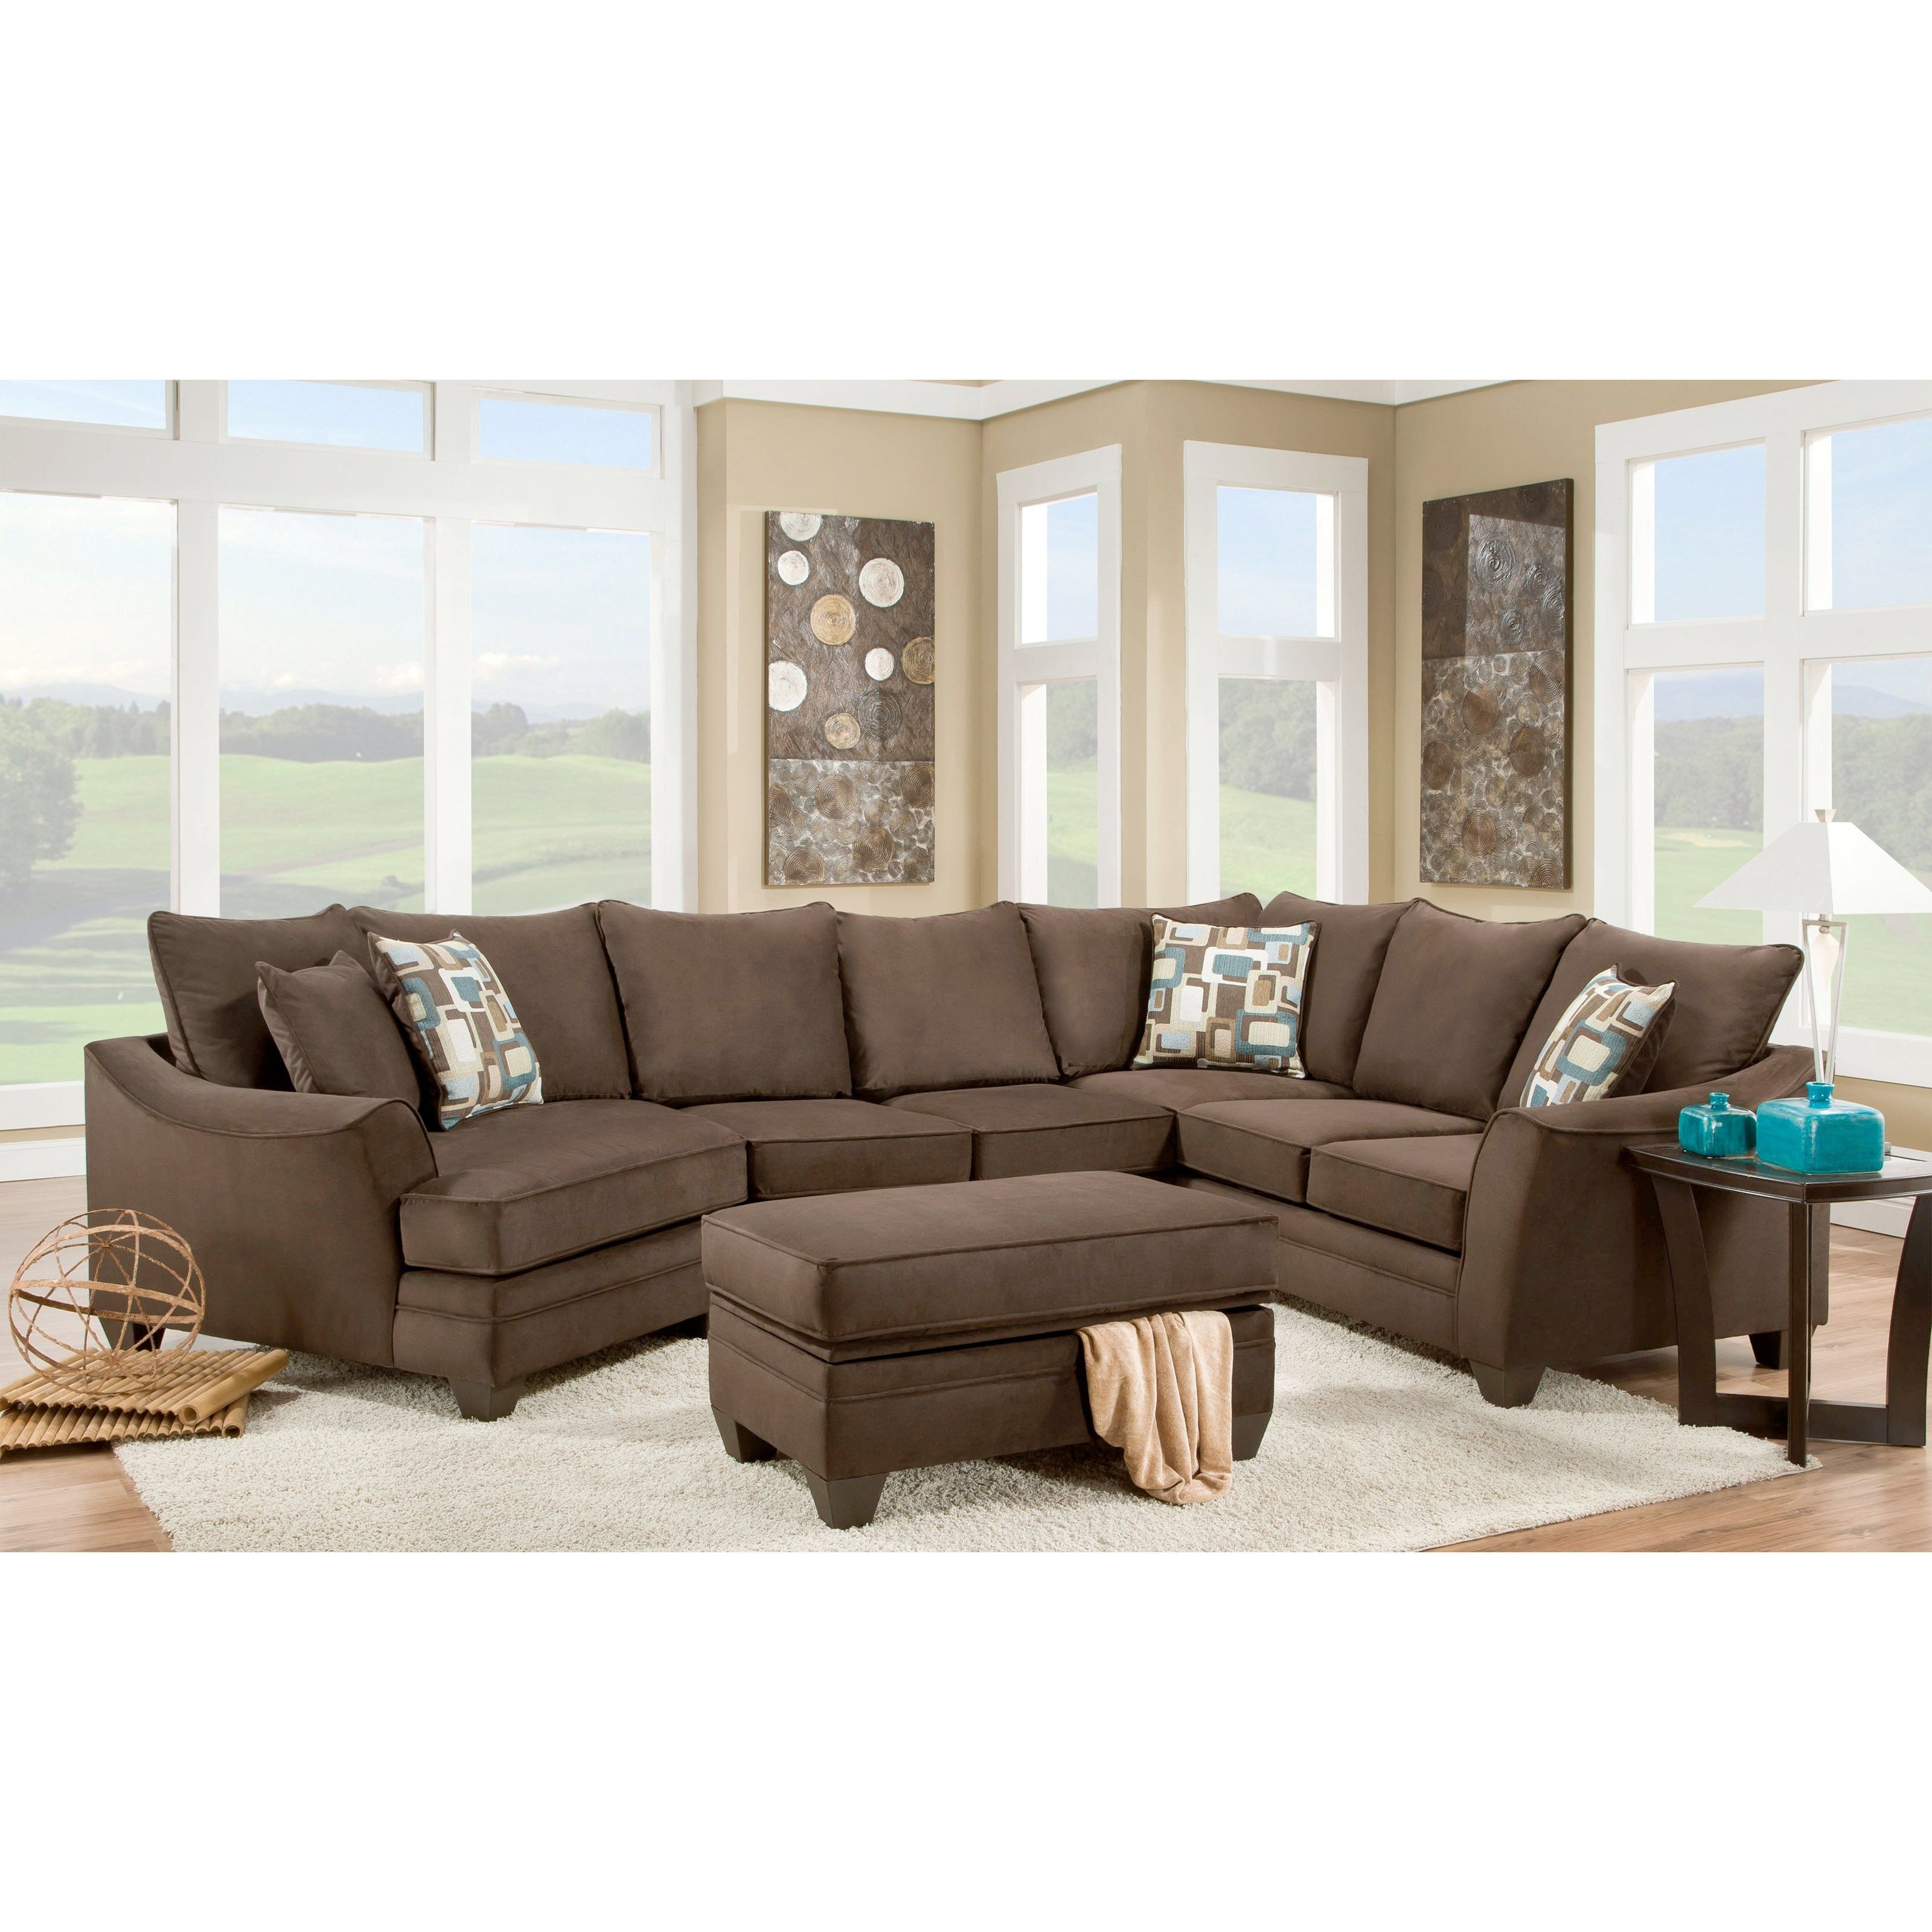 2018 Greensboro Nc Sectional Sofas Within Furniture : Yellow Corner Couch Best Recliner 9mw57 Rooms To Go (Photo 1 of 15)